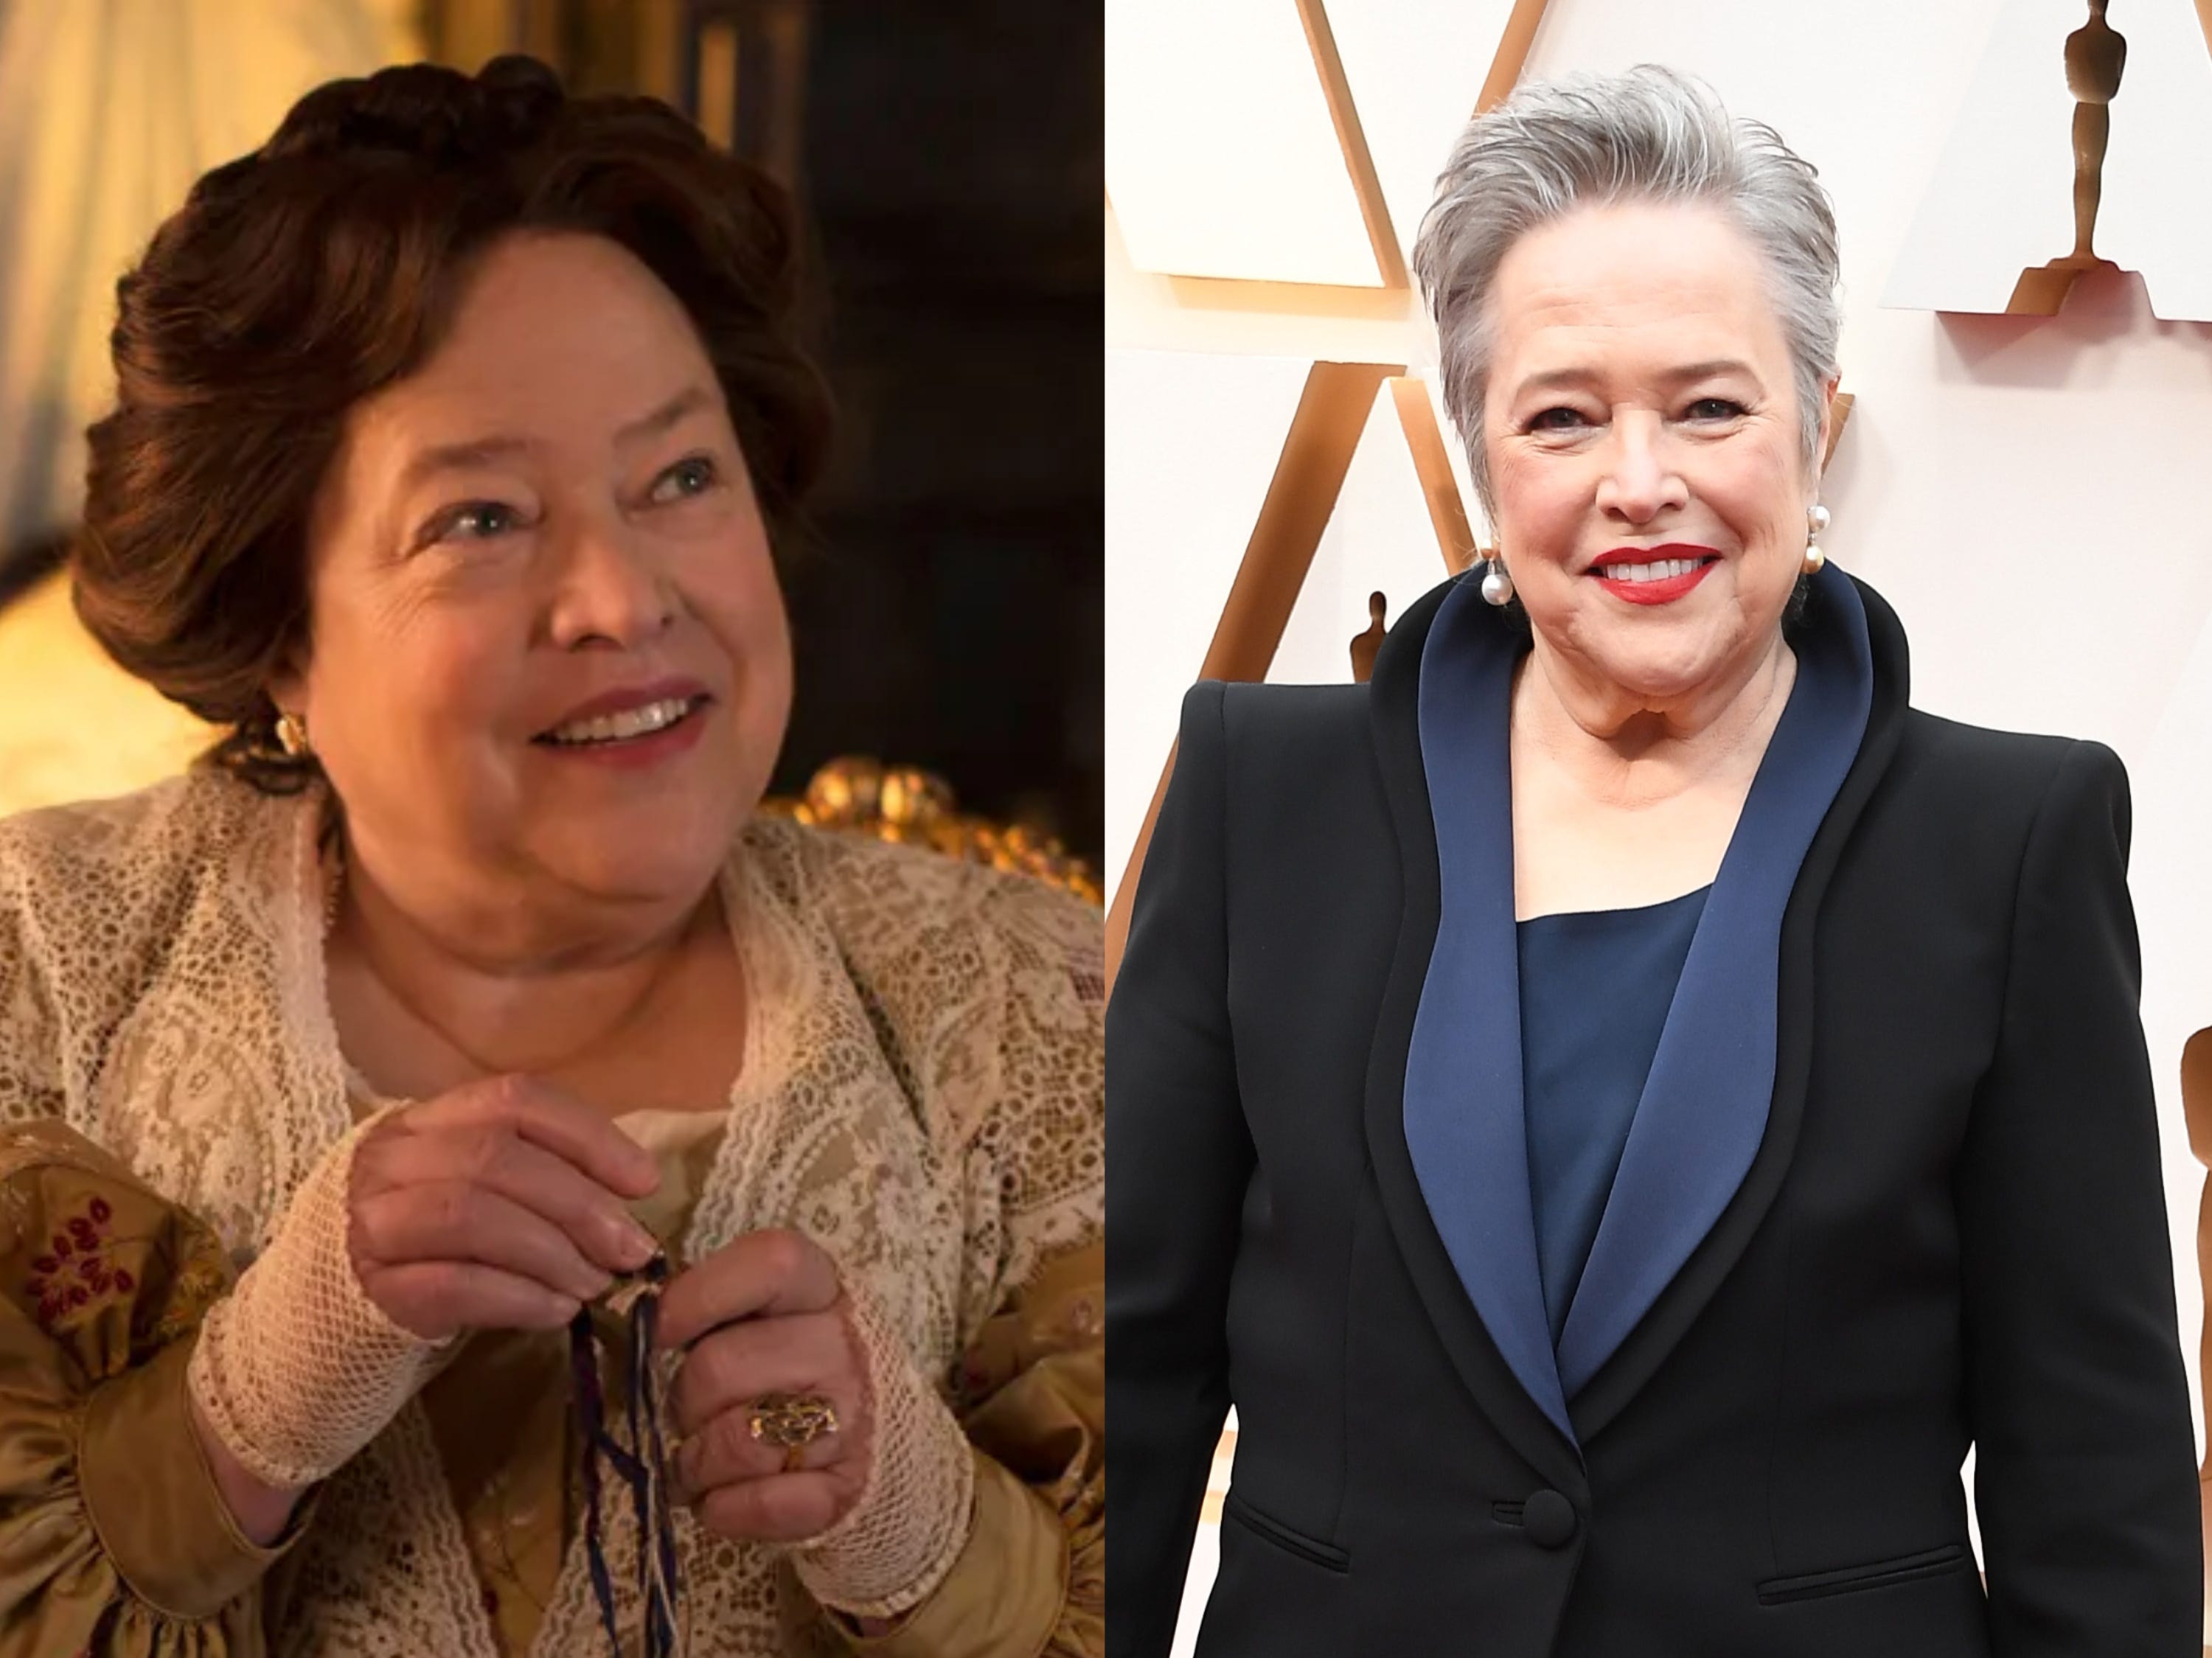 Kathy Bates als Delphine LaLaurie in „American Horror Story: Coven“ und bei den 92. Annual Academy Awards in Hollywood and Highland am 9. Februar 2020 in Hollywood, Kalifornien.